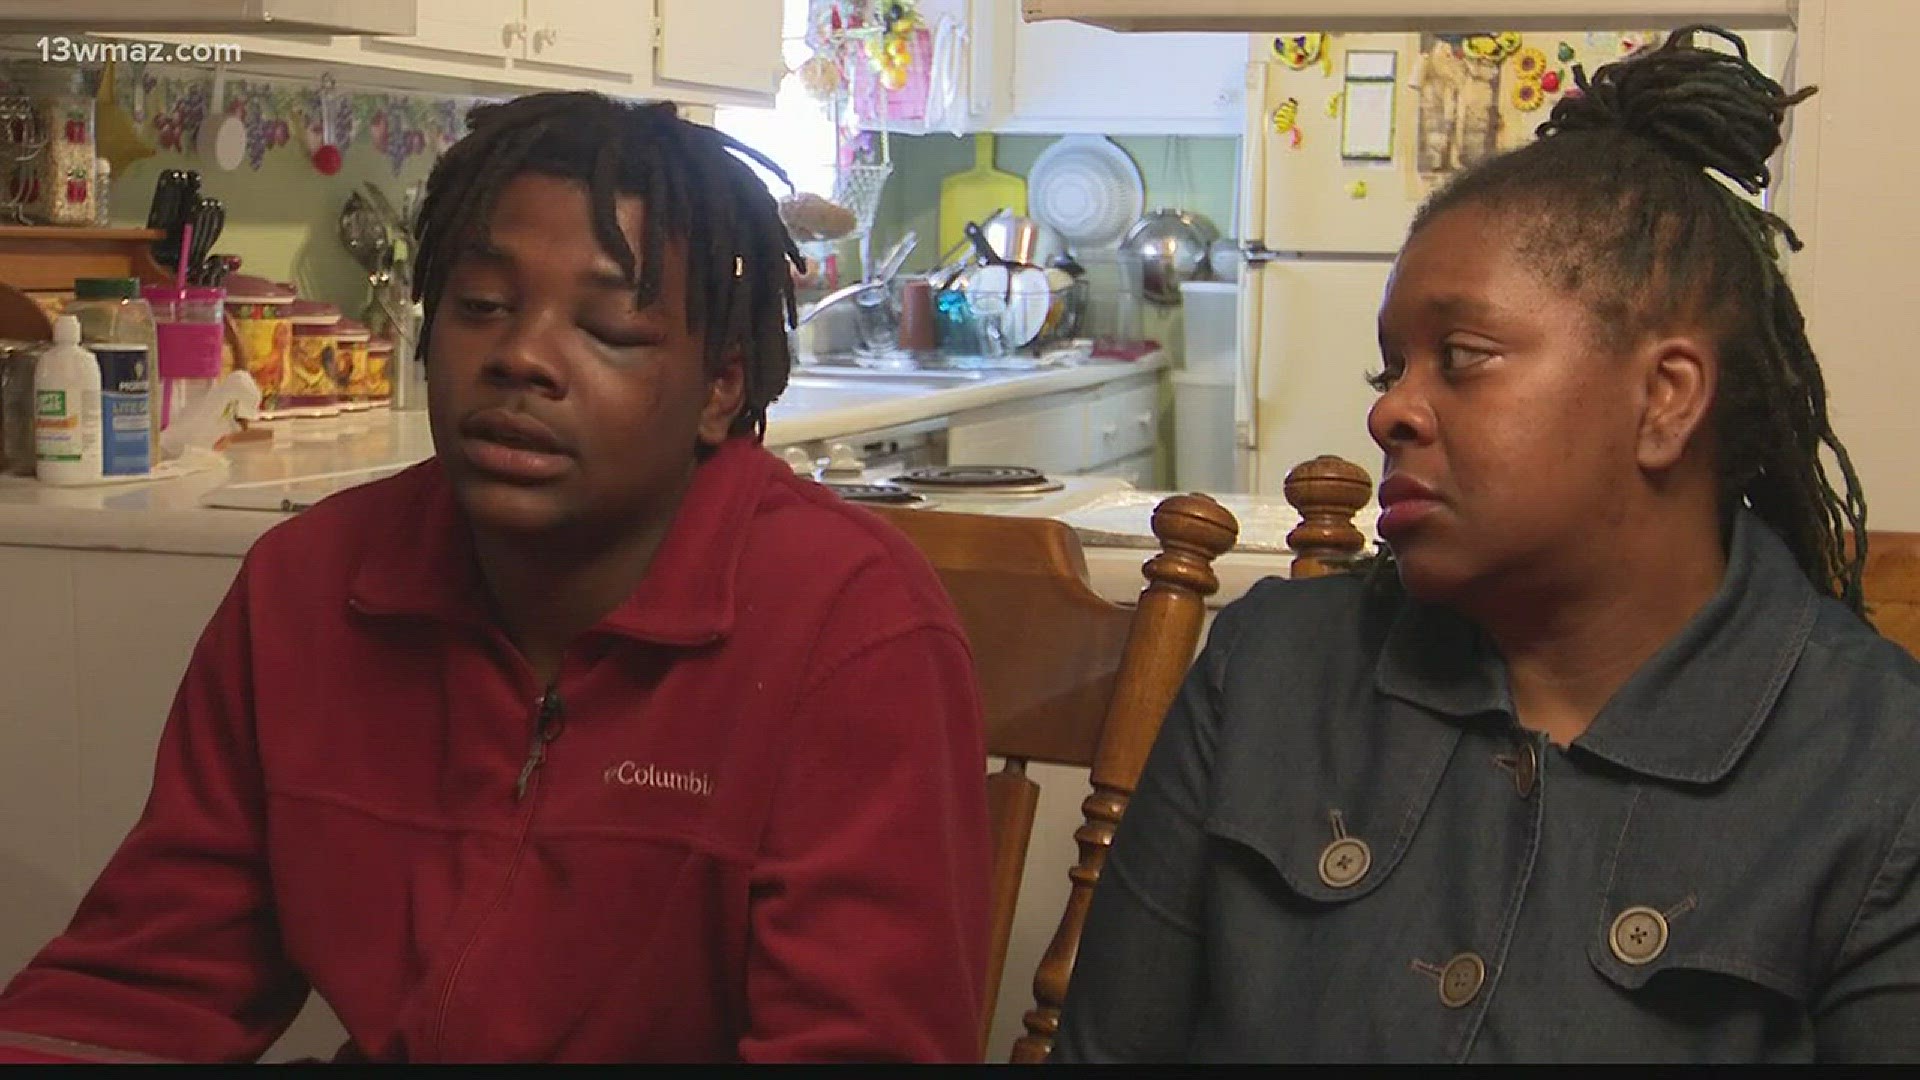 Wheeler County teen alleges police brutality